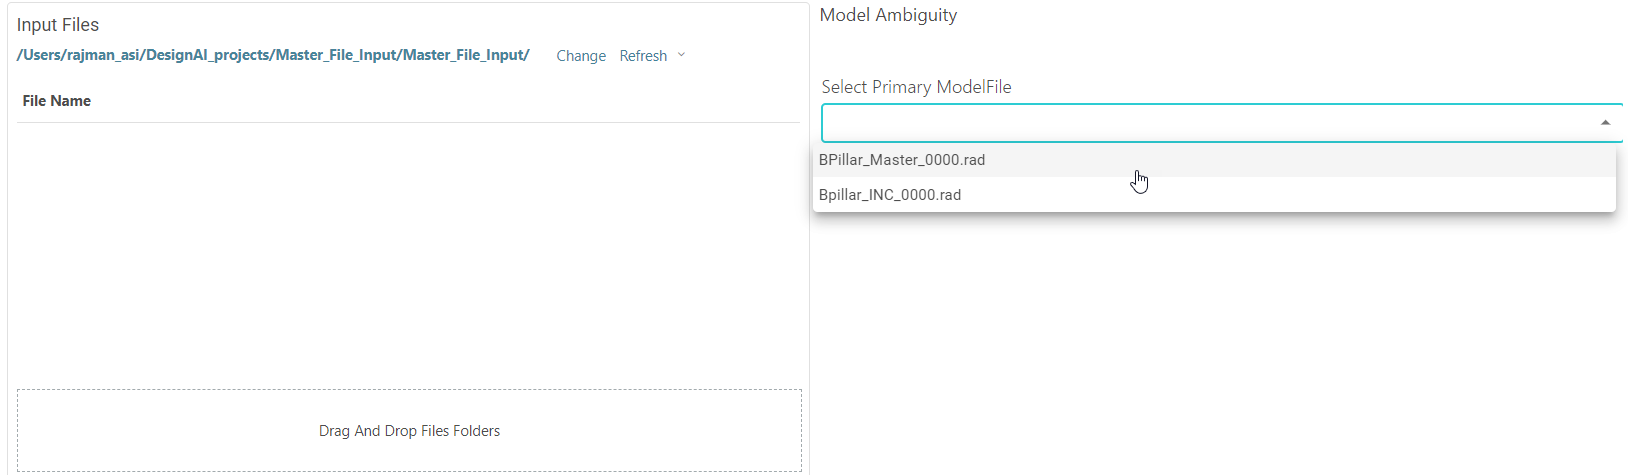 Select Primary Model File